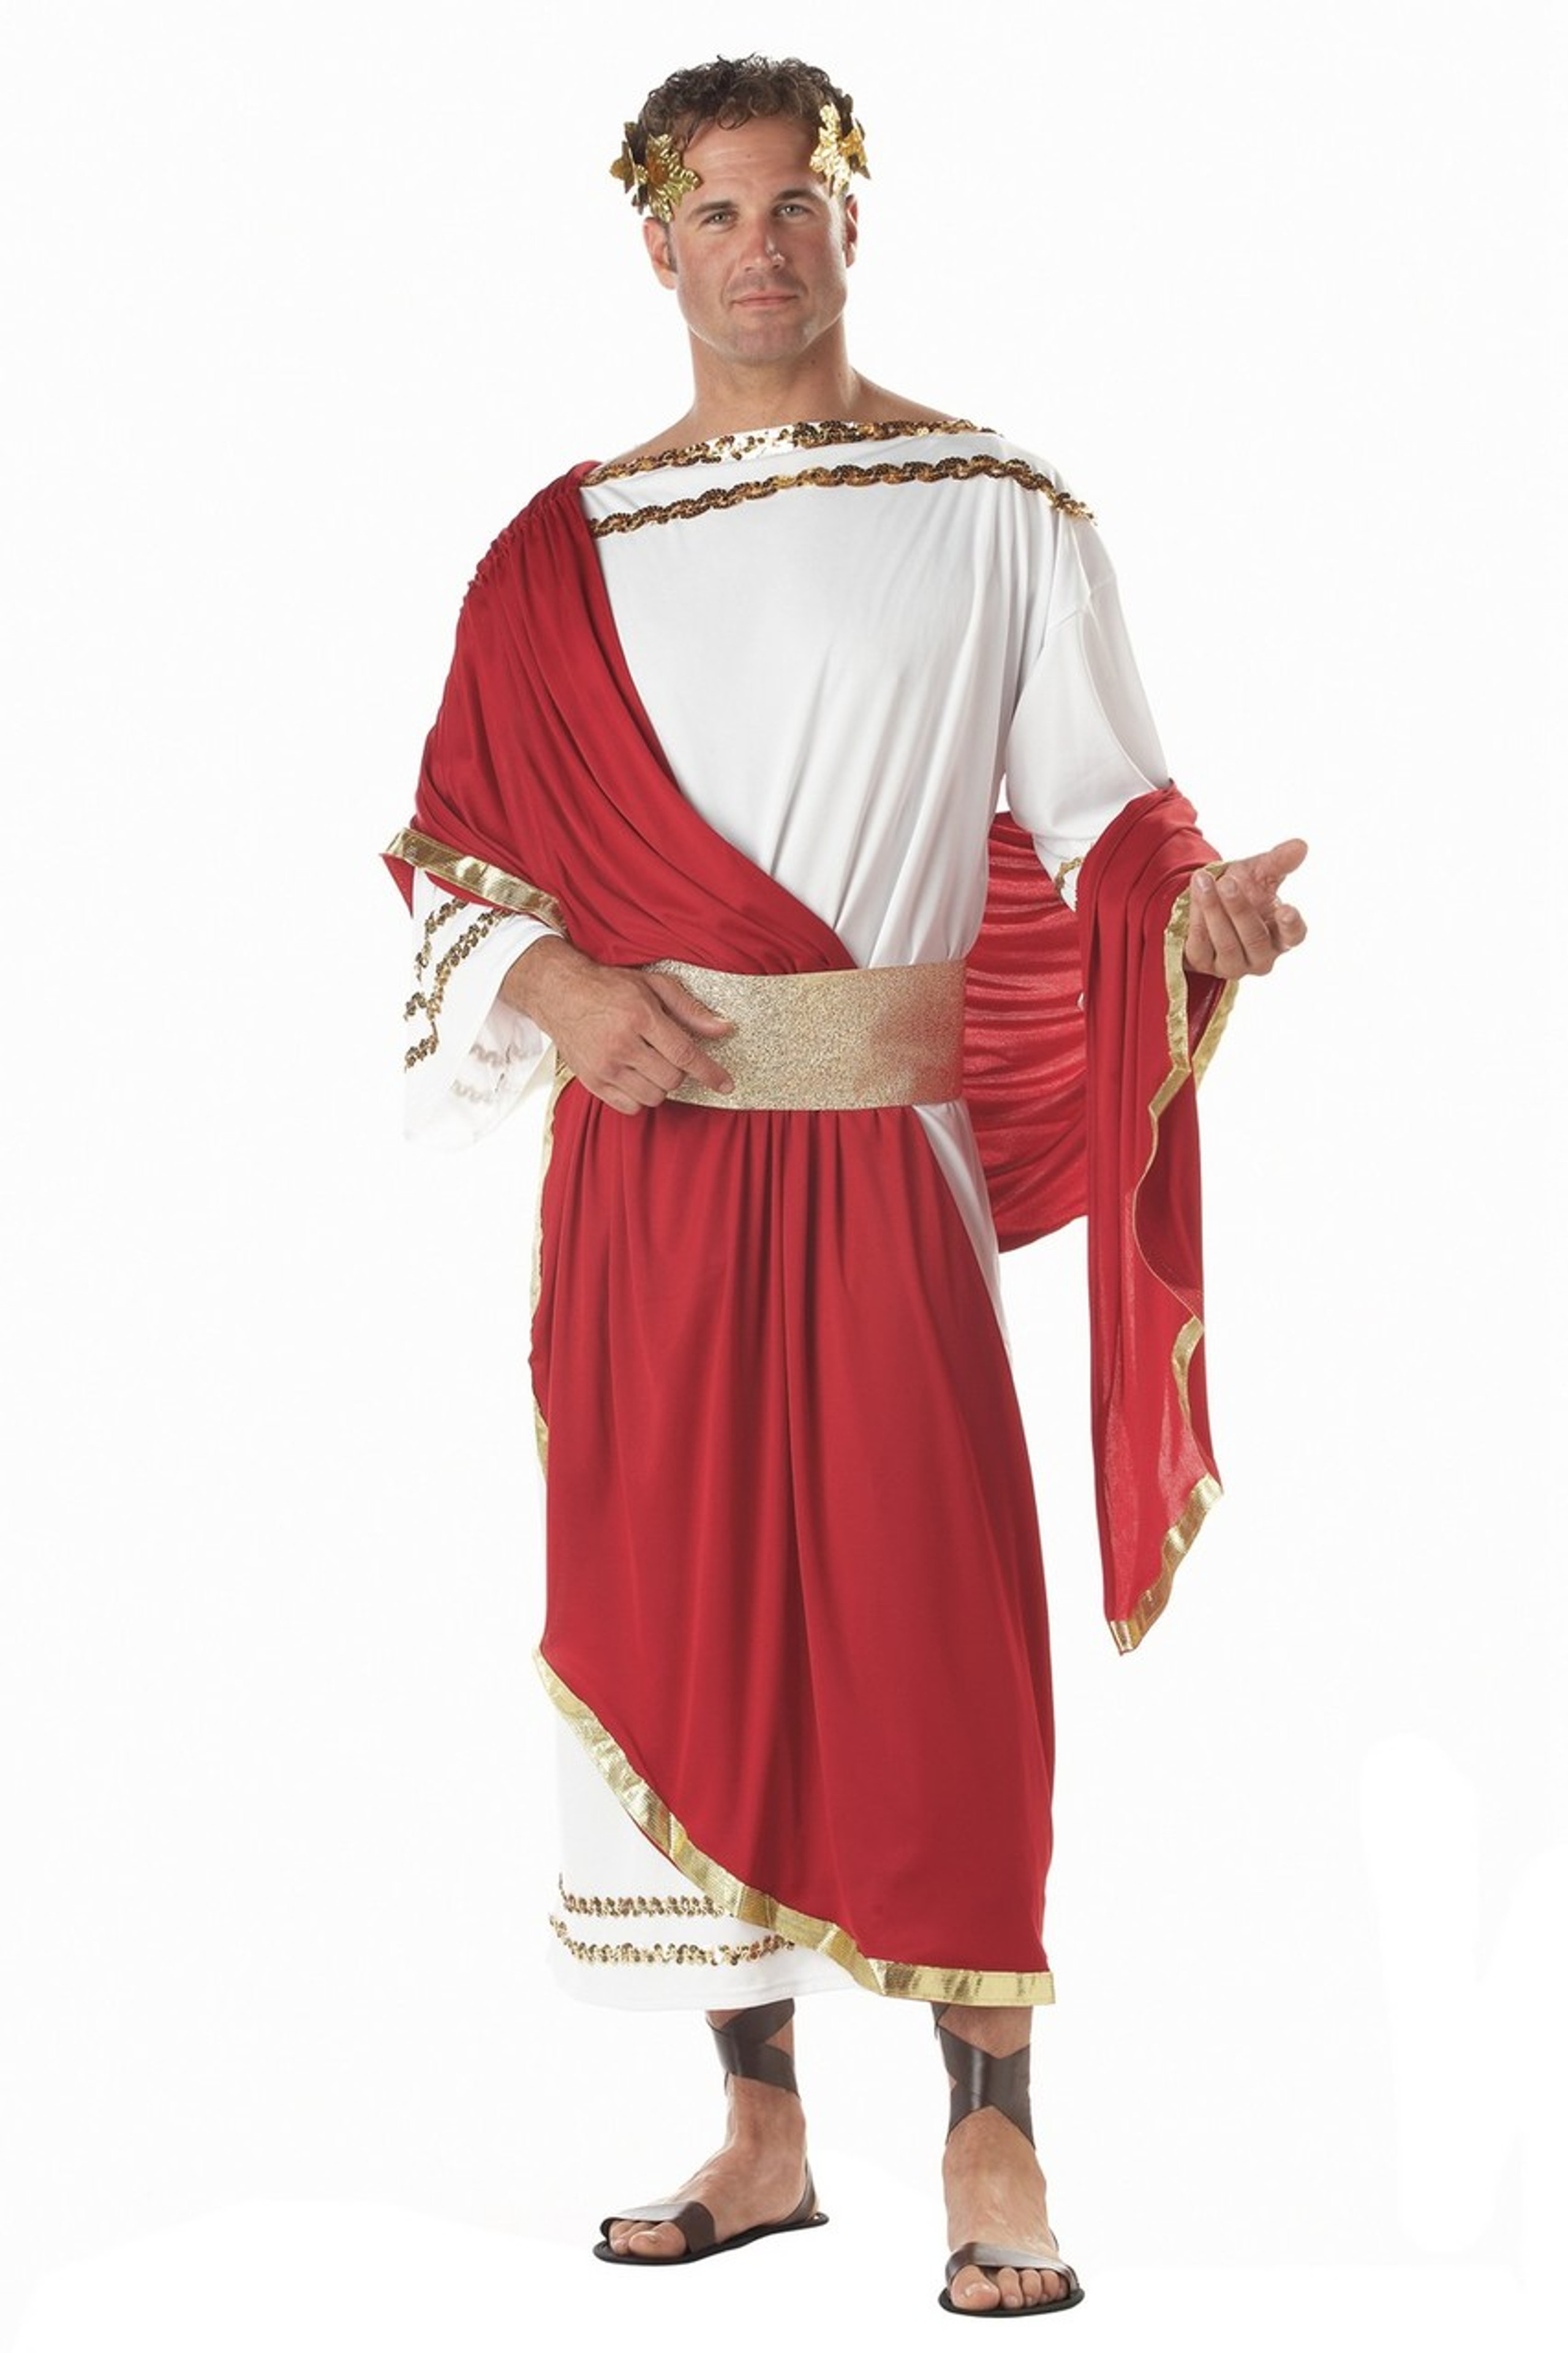 Caesar Roman Toga Costume Fancy Dress from Costumes To Buy.